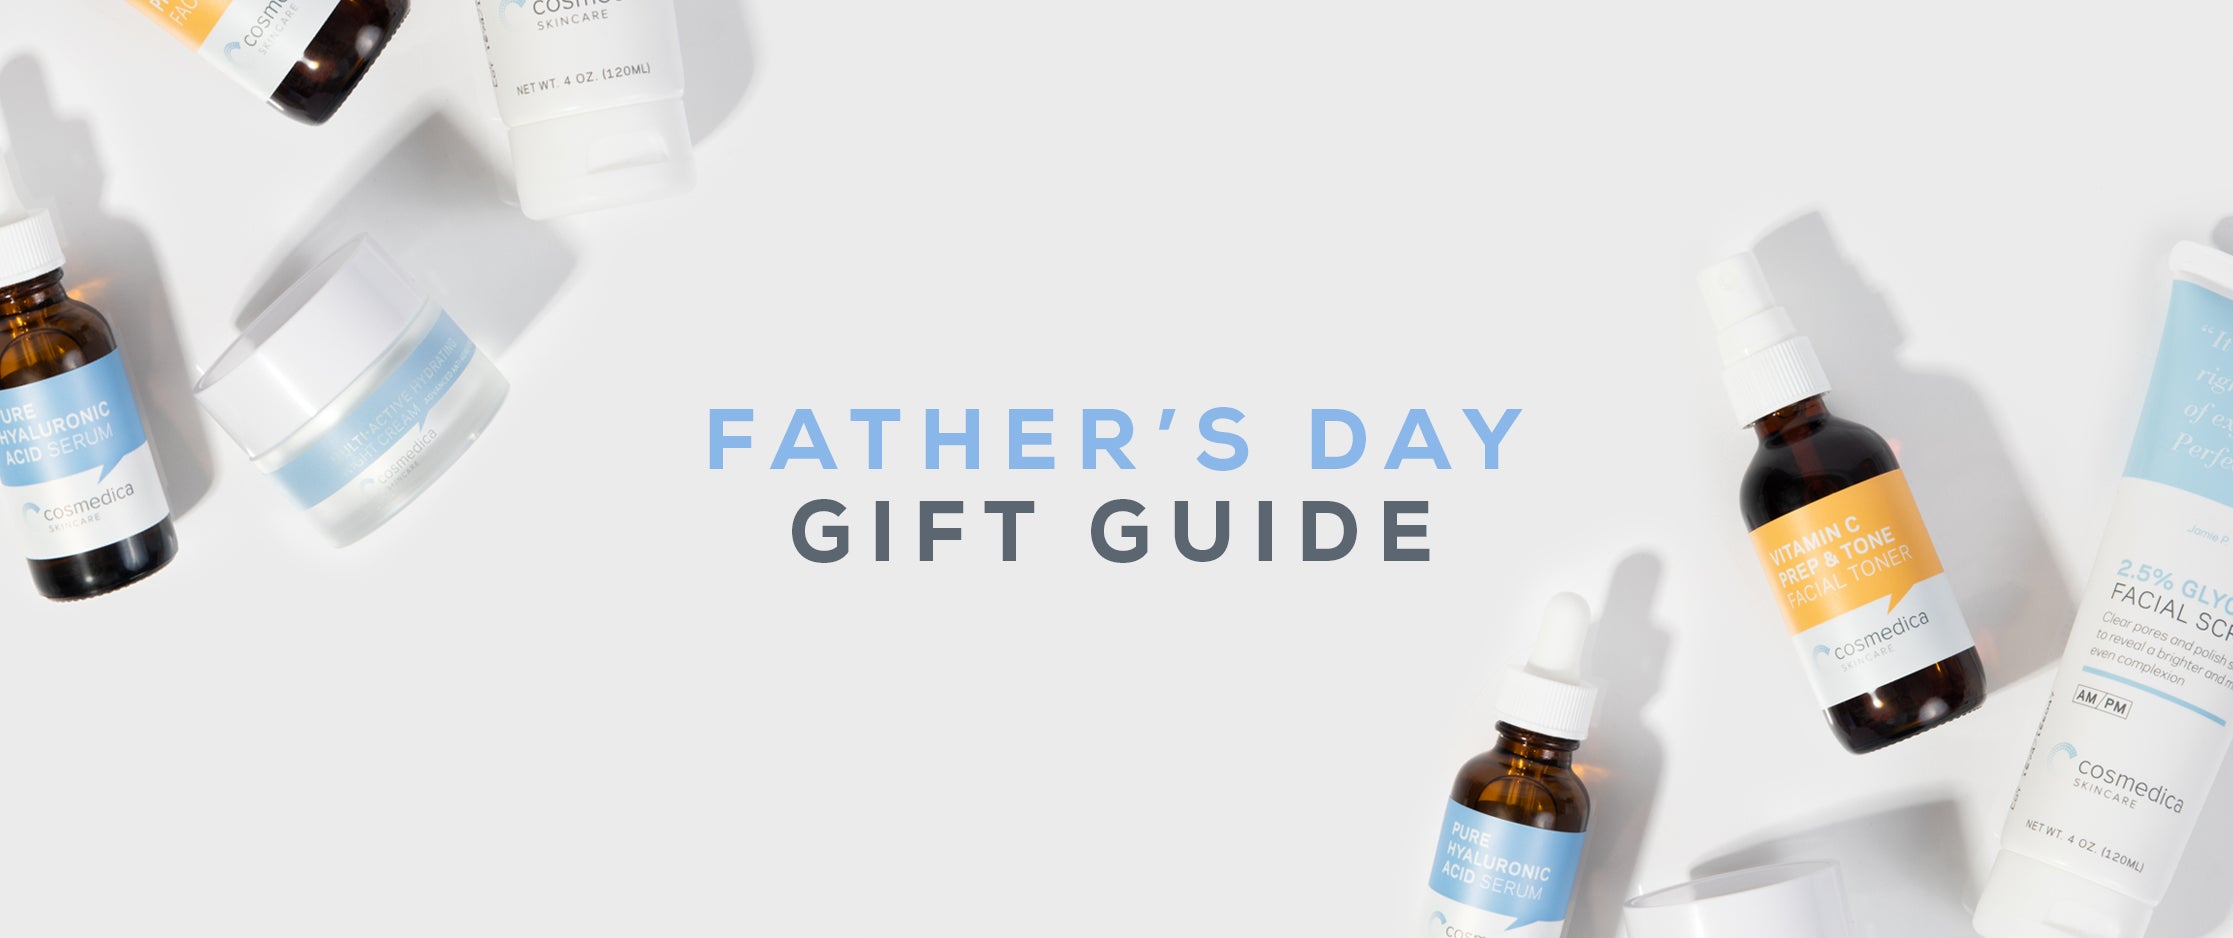 Father's Day Gift Guide from Cosmedica Skincare